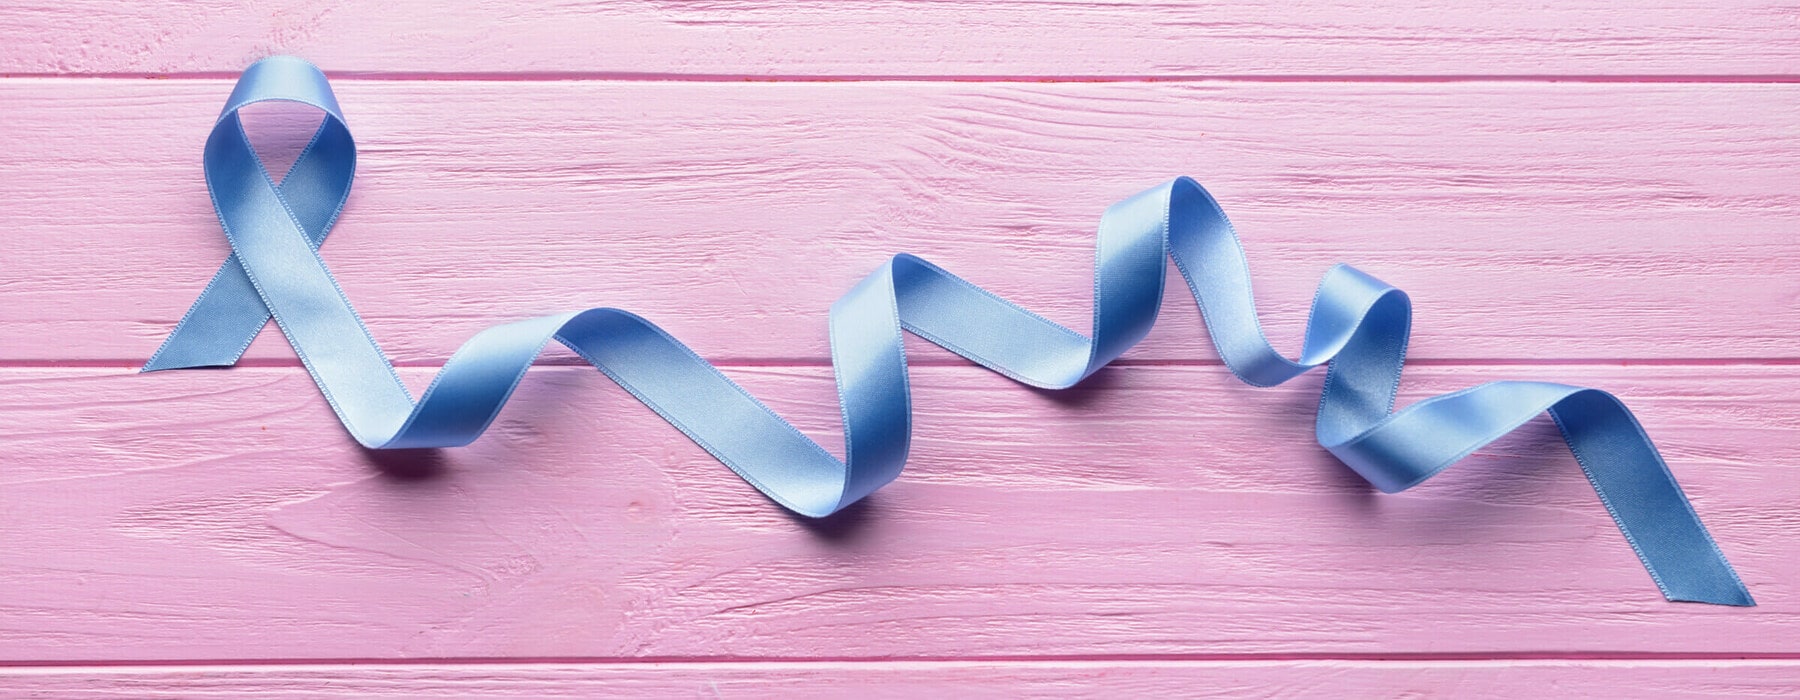 Blue,Ribbon,On,Color,Wooden,Table.,Cancer,Concept